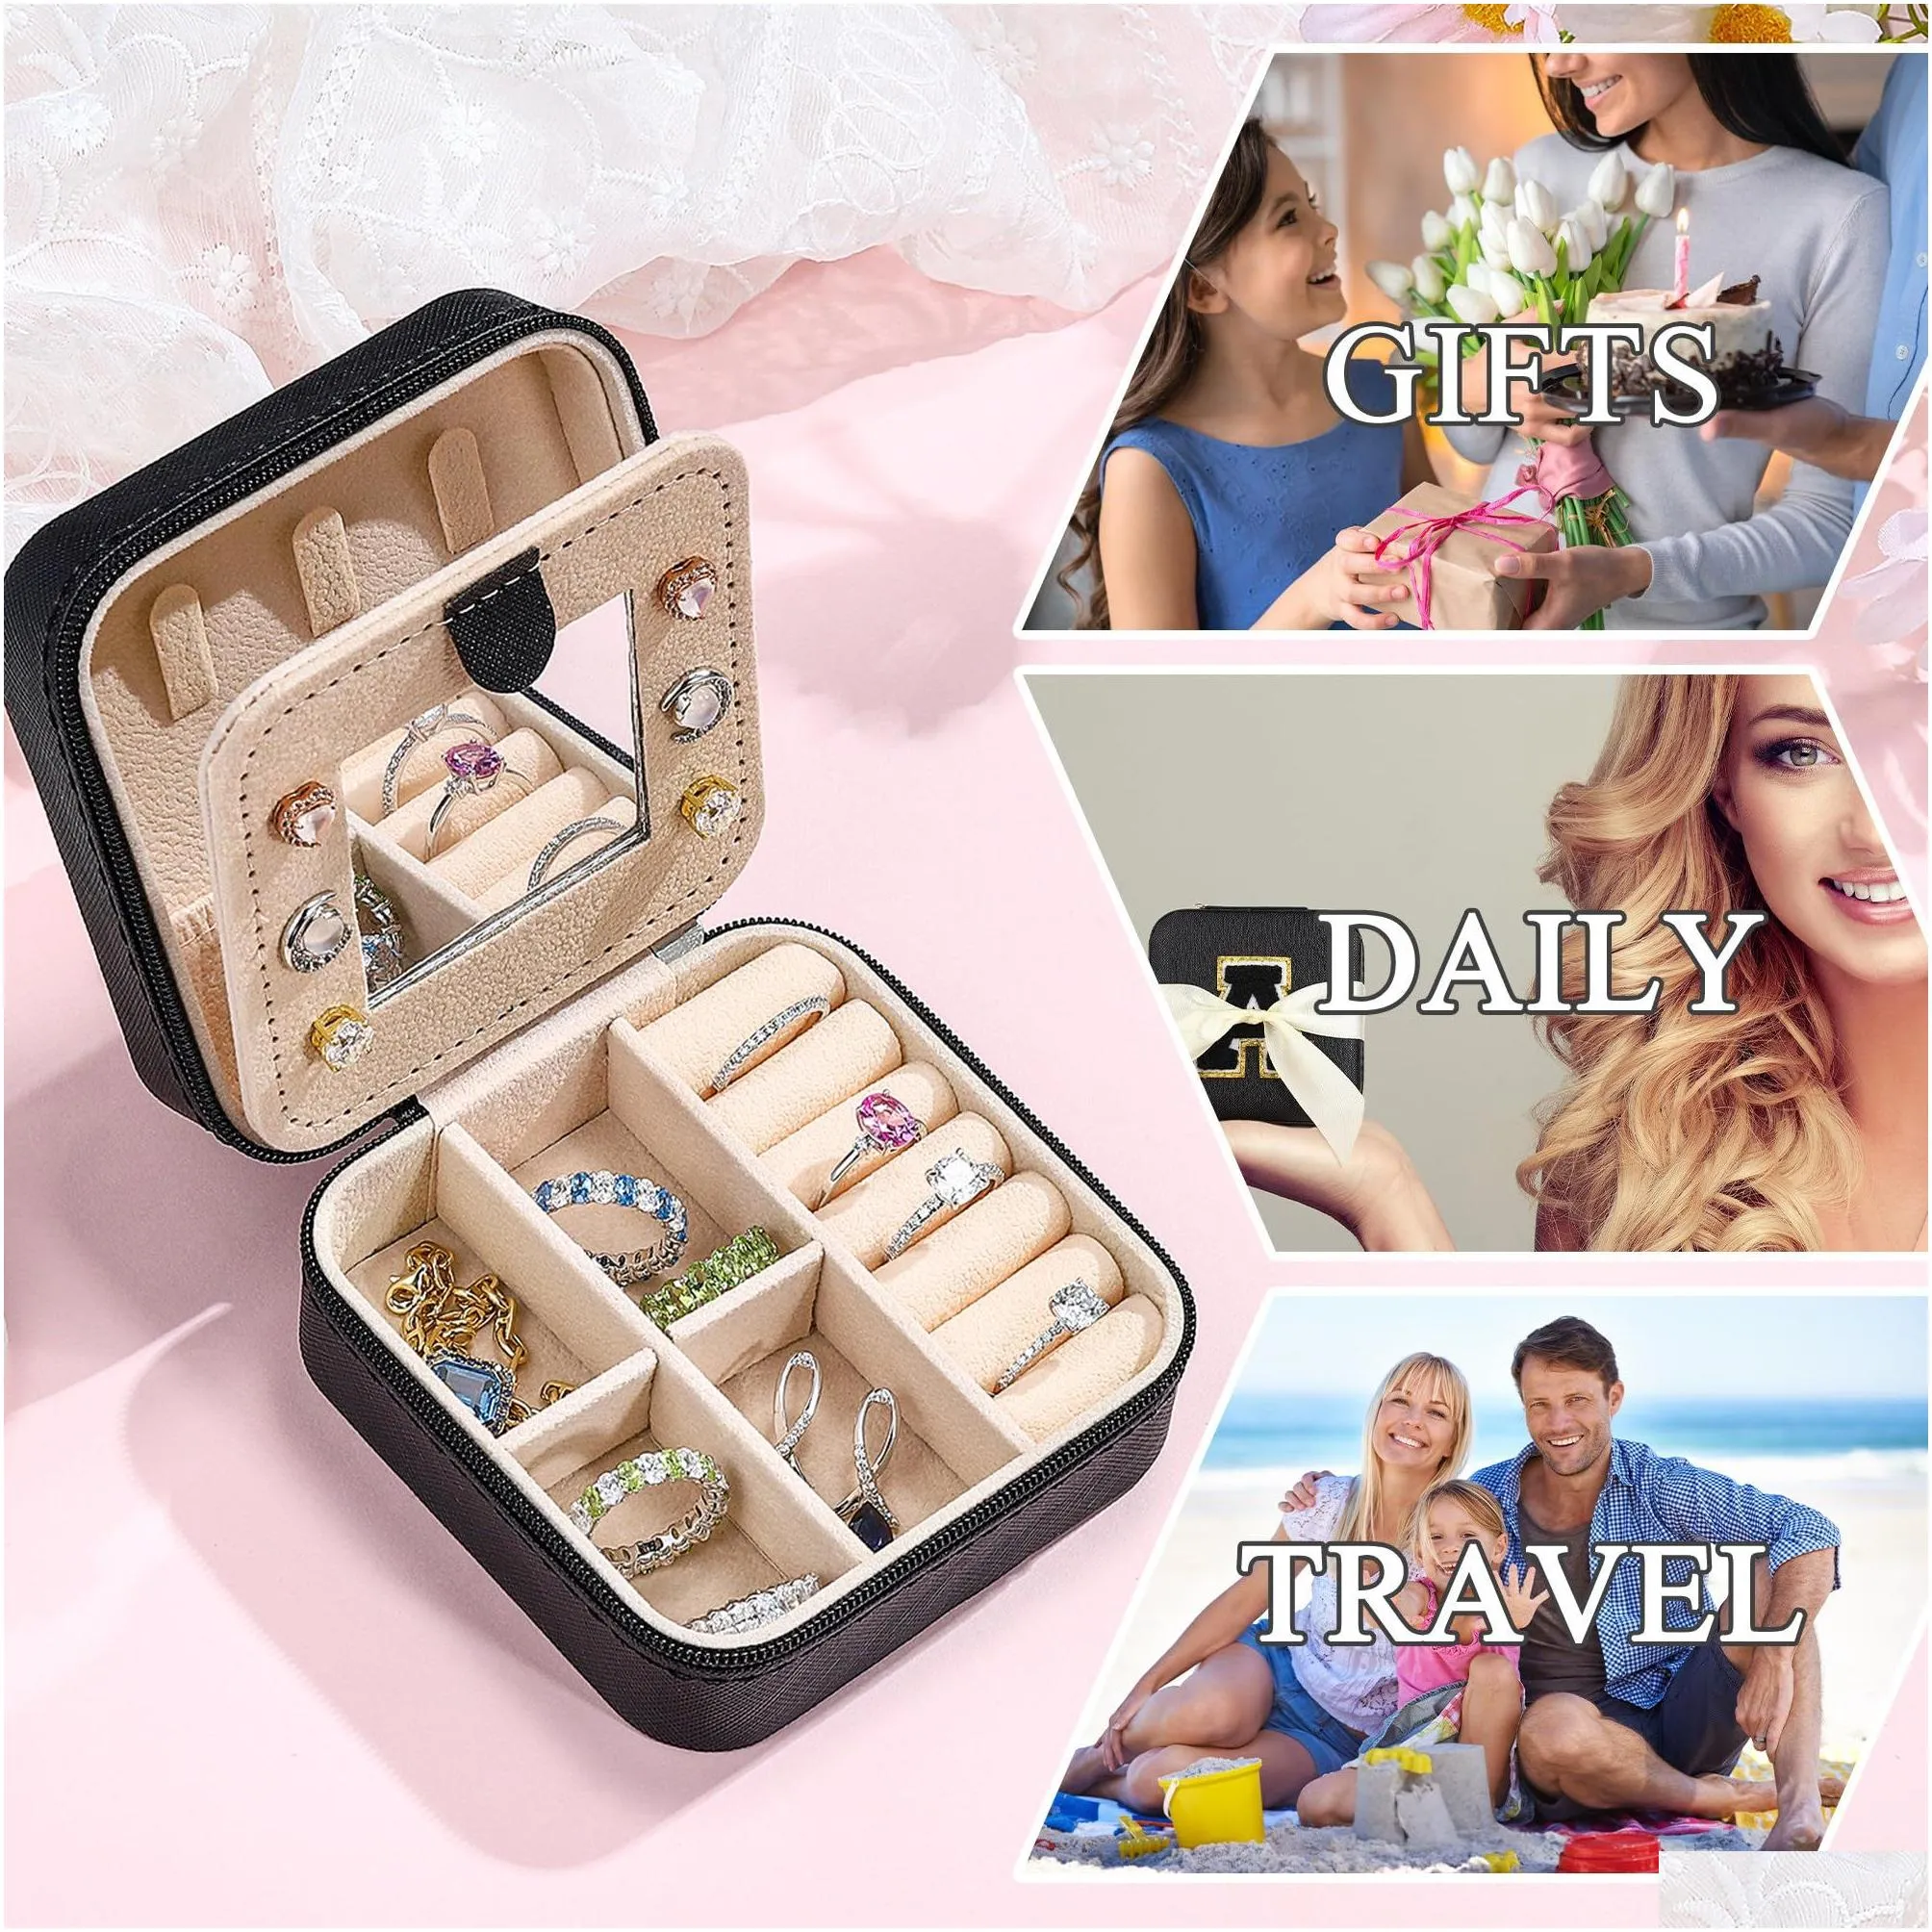 Black Color Travel Jewelry Case Boxes Personalized Gifts Birthday Gifts For Women Christmas Gifts For Teens Girls Initial Letters